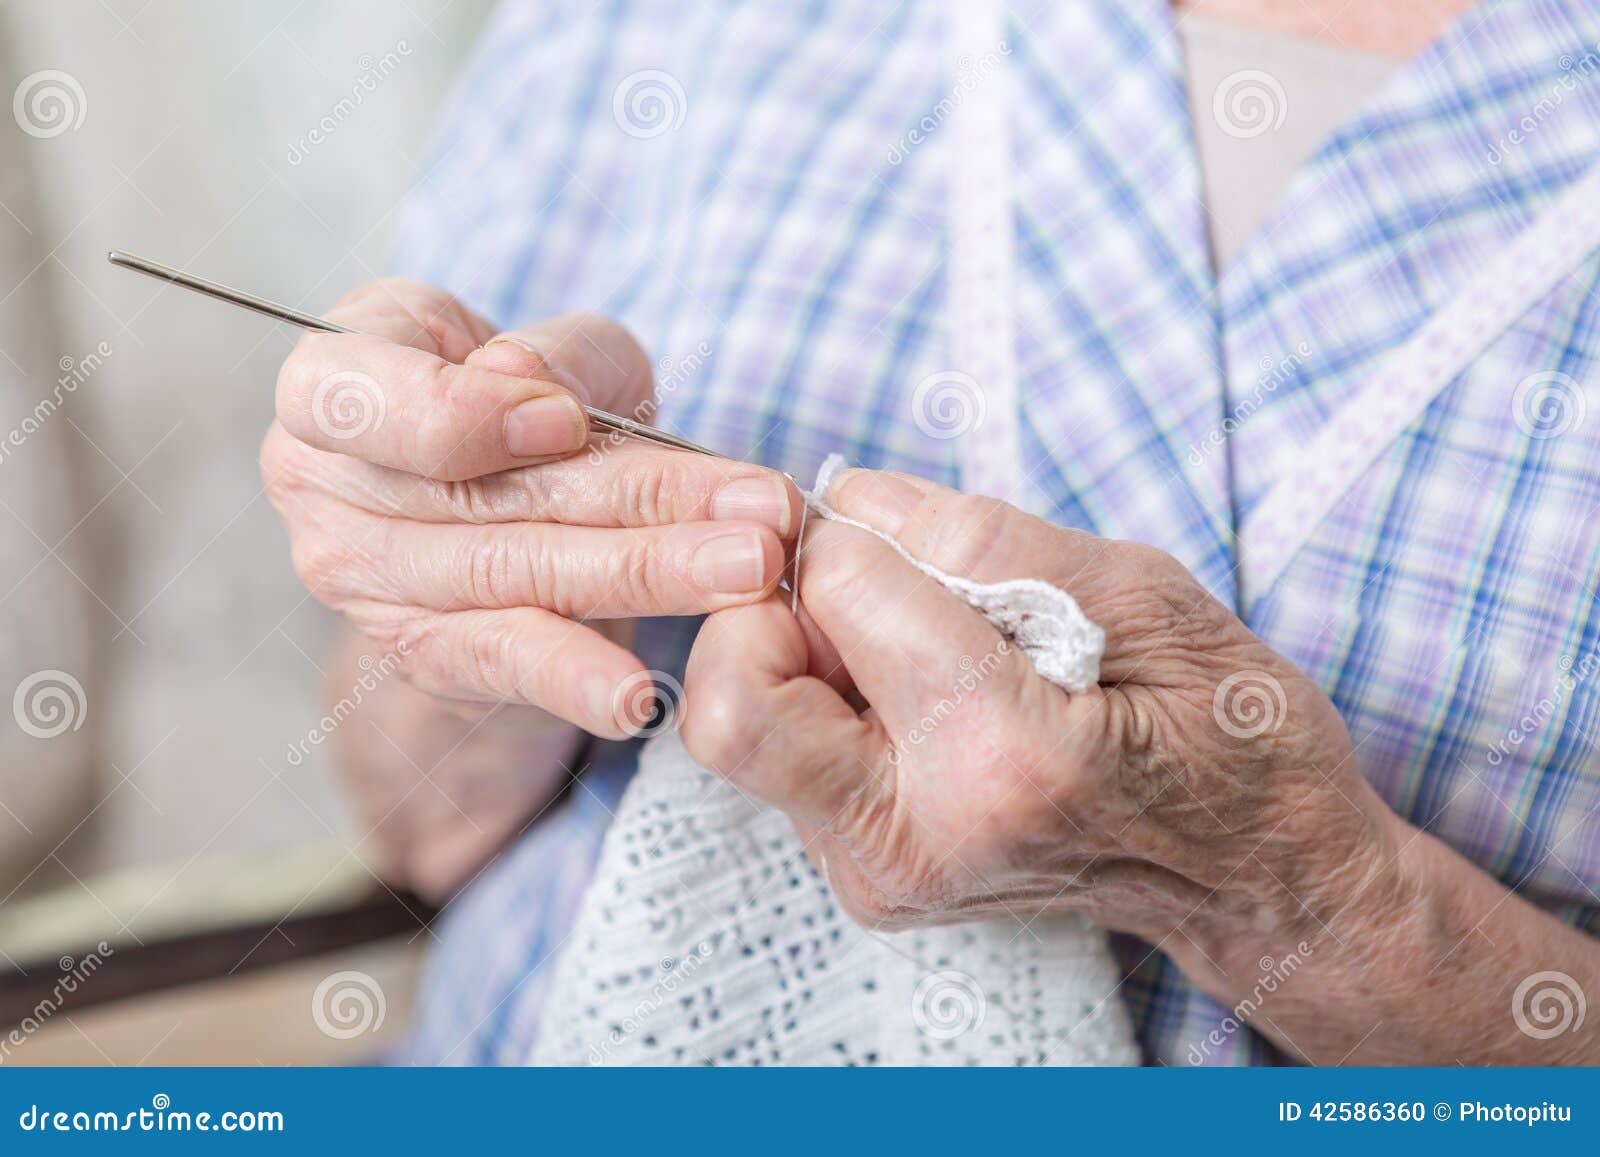 Hands crocheting stock photo. Image of female, sewing - 42586360